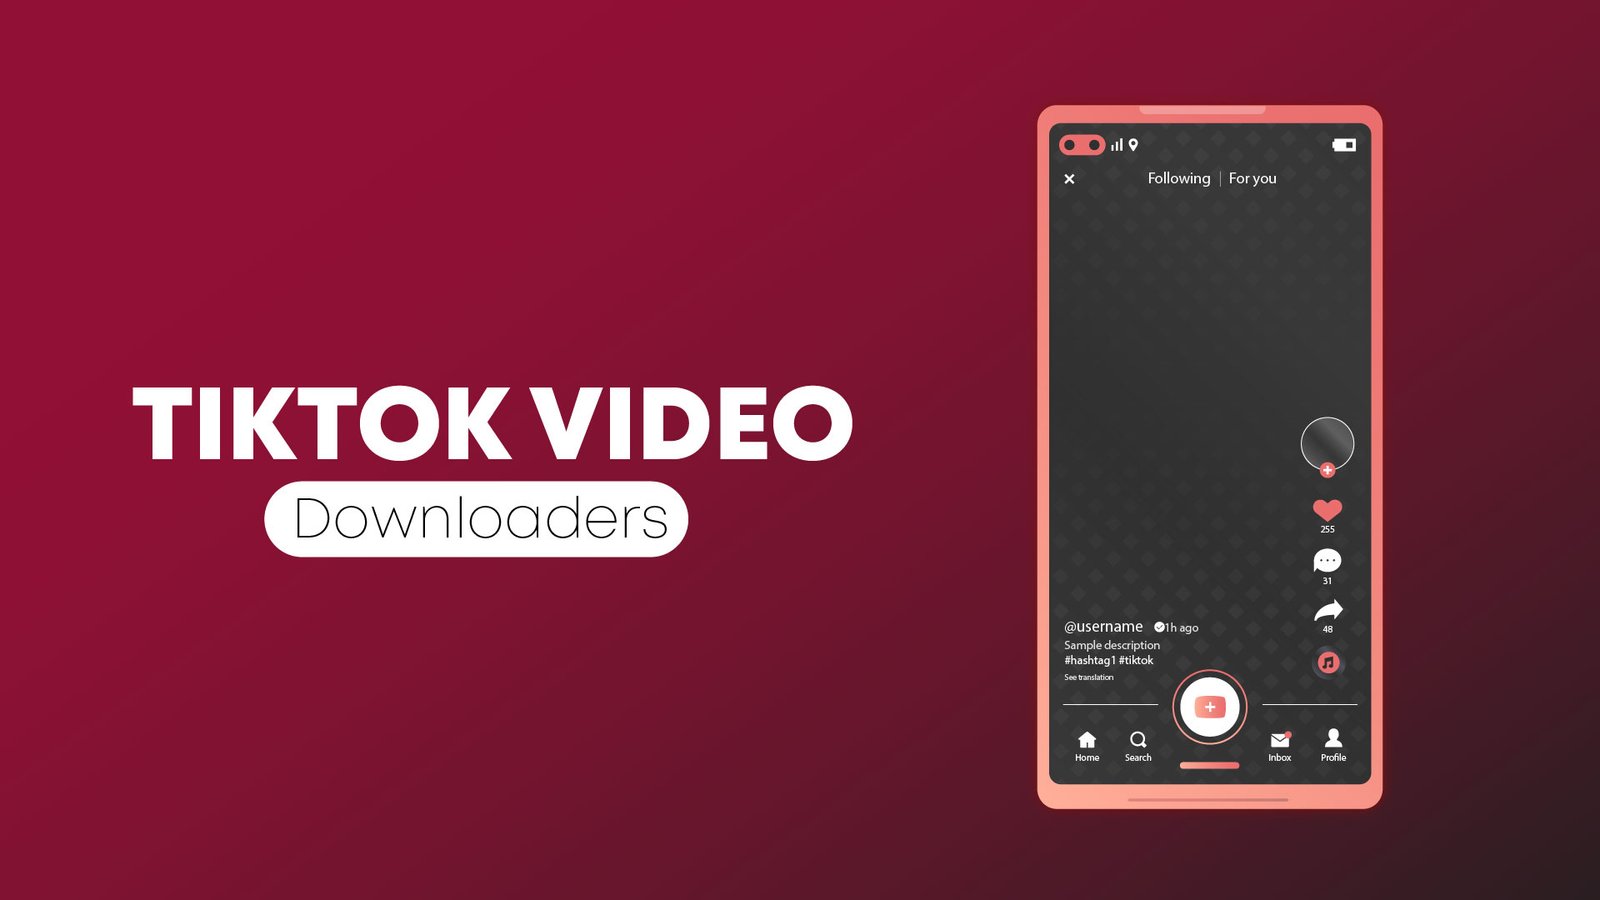 15 Free TikTok Video Downloaders To Use In 2023